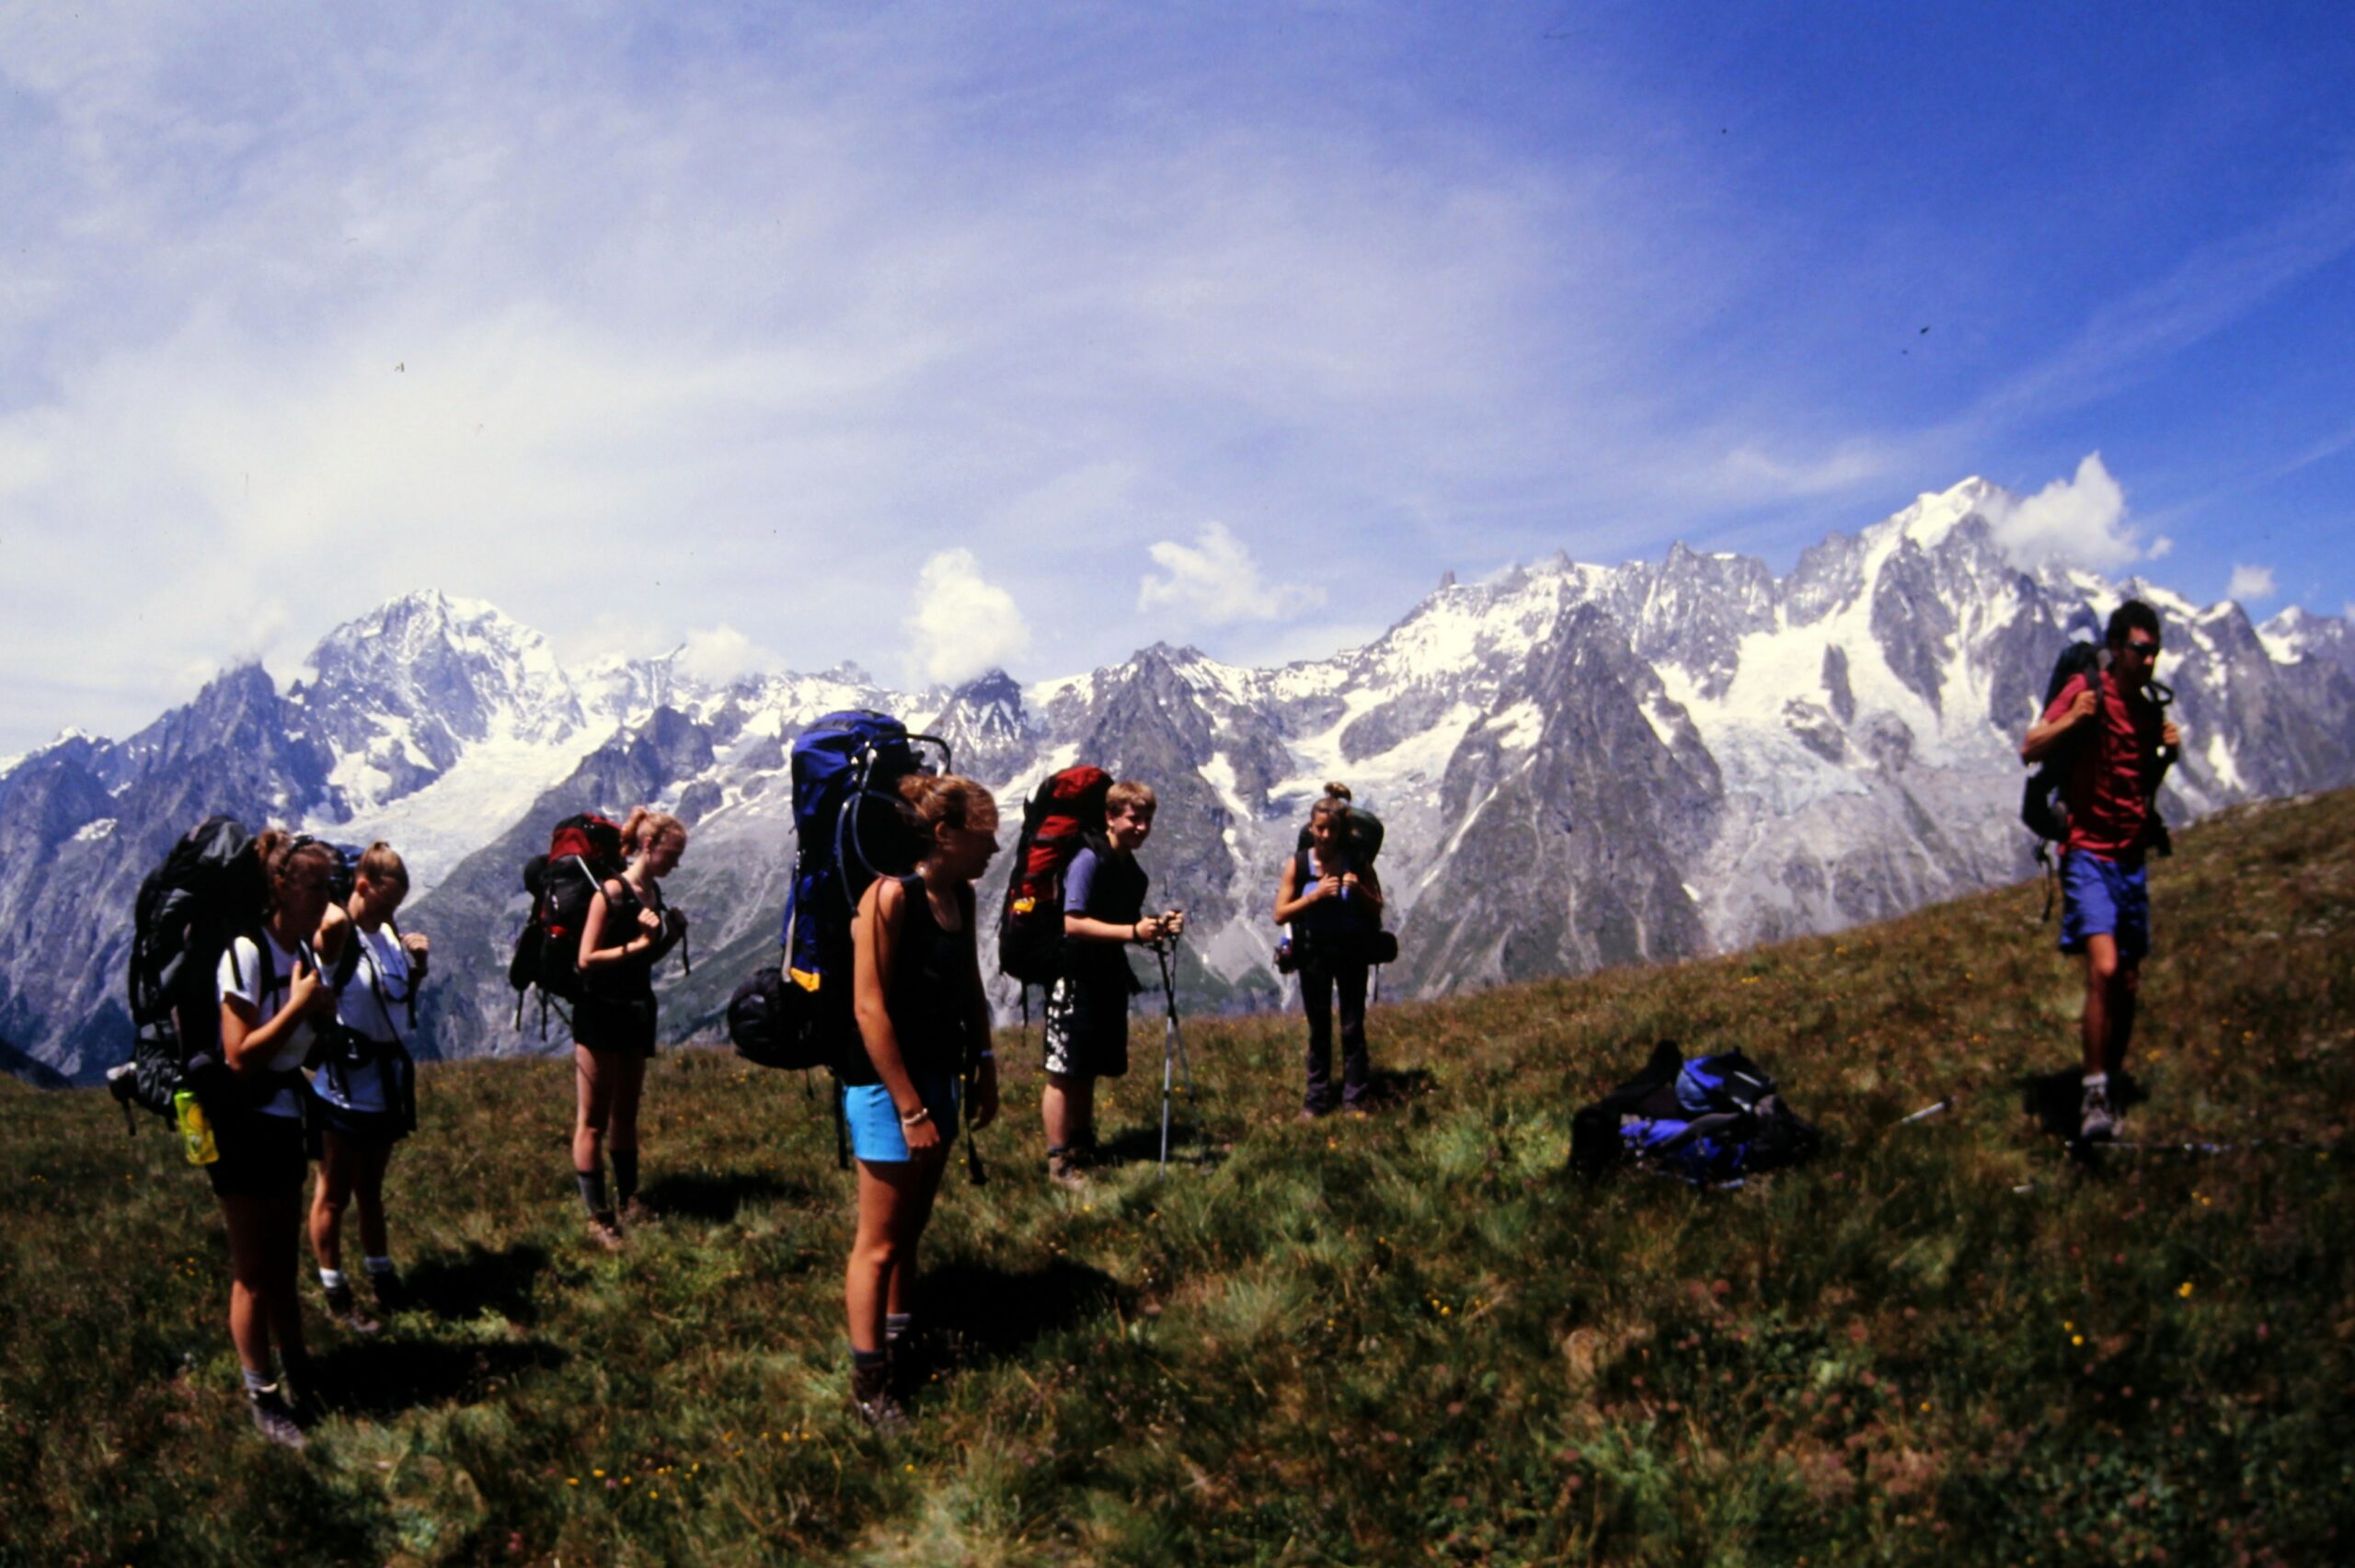 2002 backpacking in front of snowy mountains